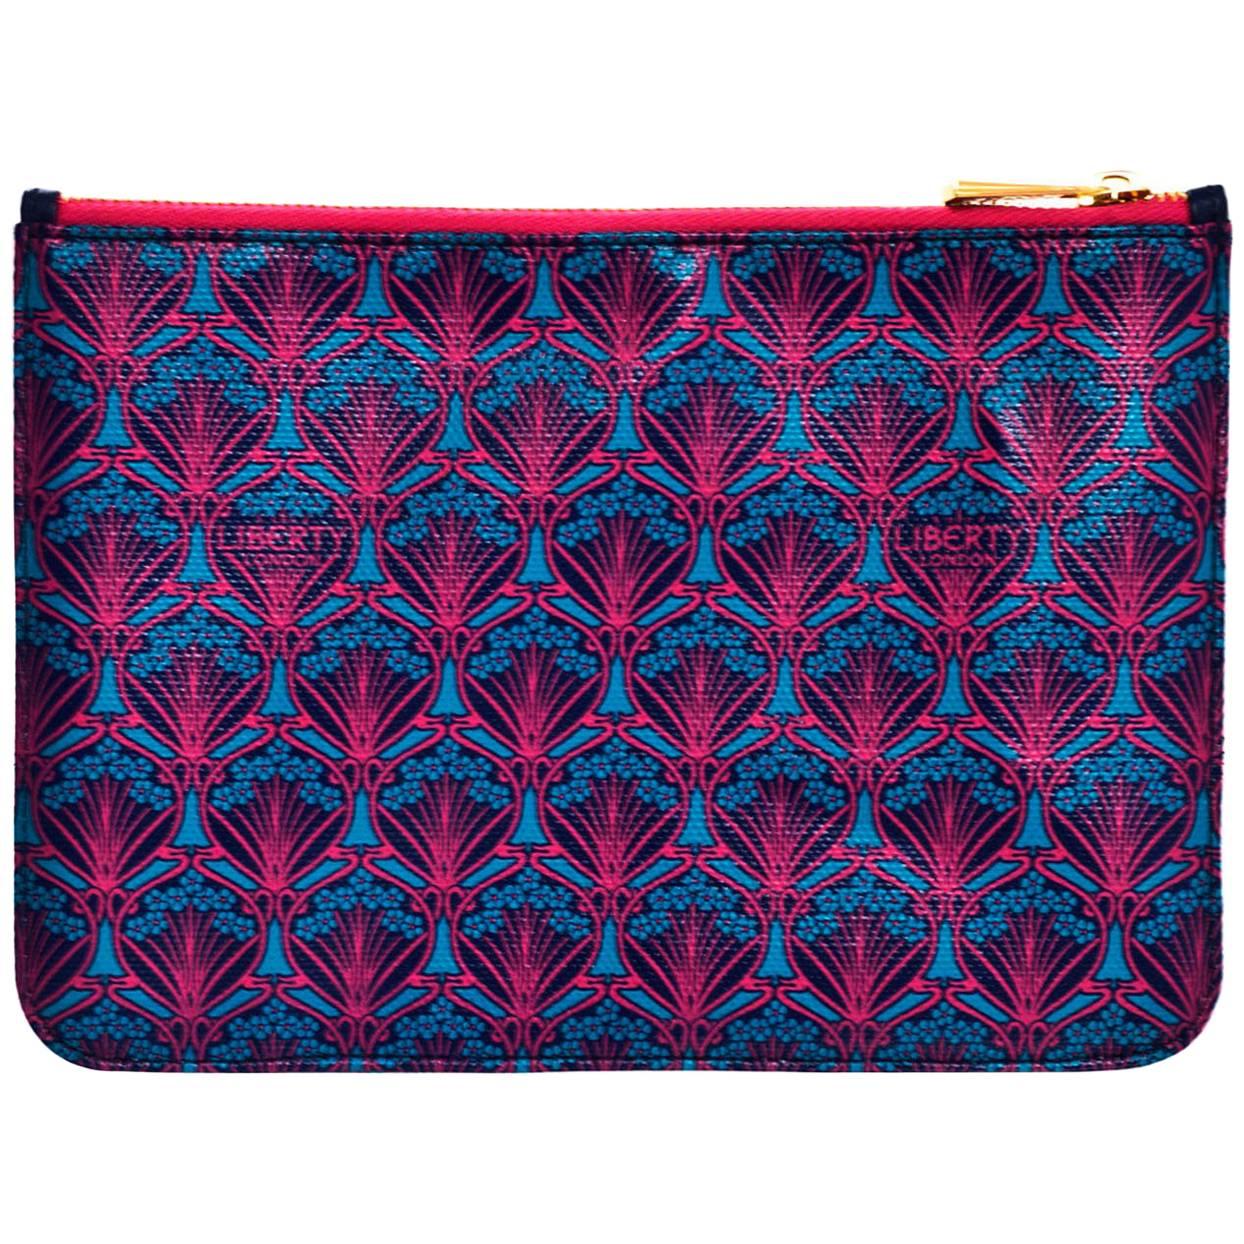 Liberty London Pink & Blue Iphis-Print Zip Top Pouch/Clutch Bag